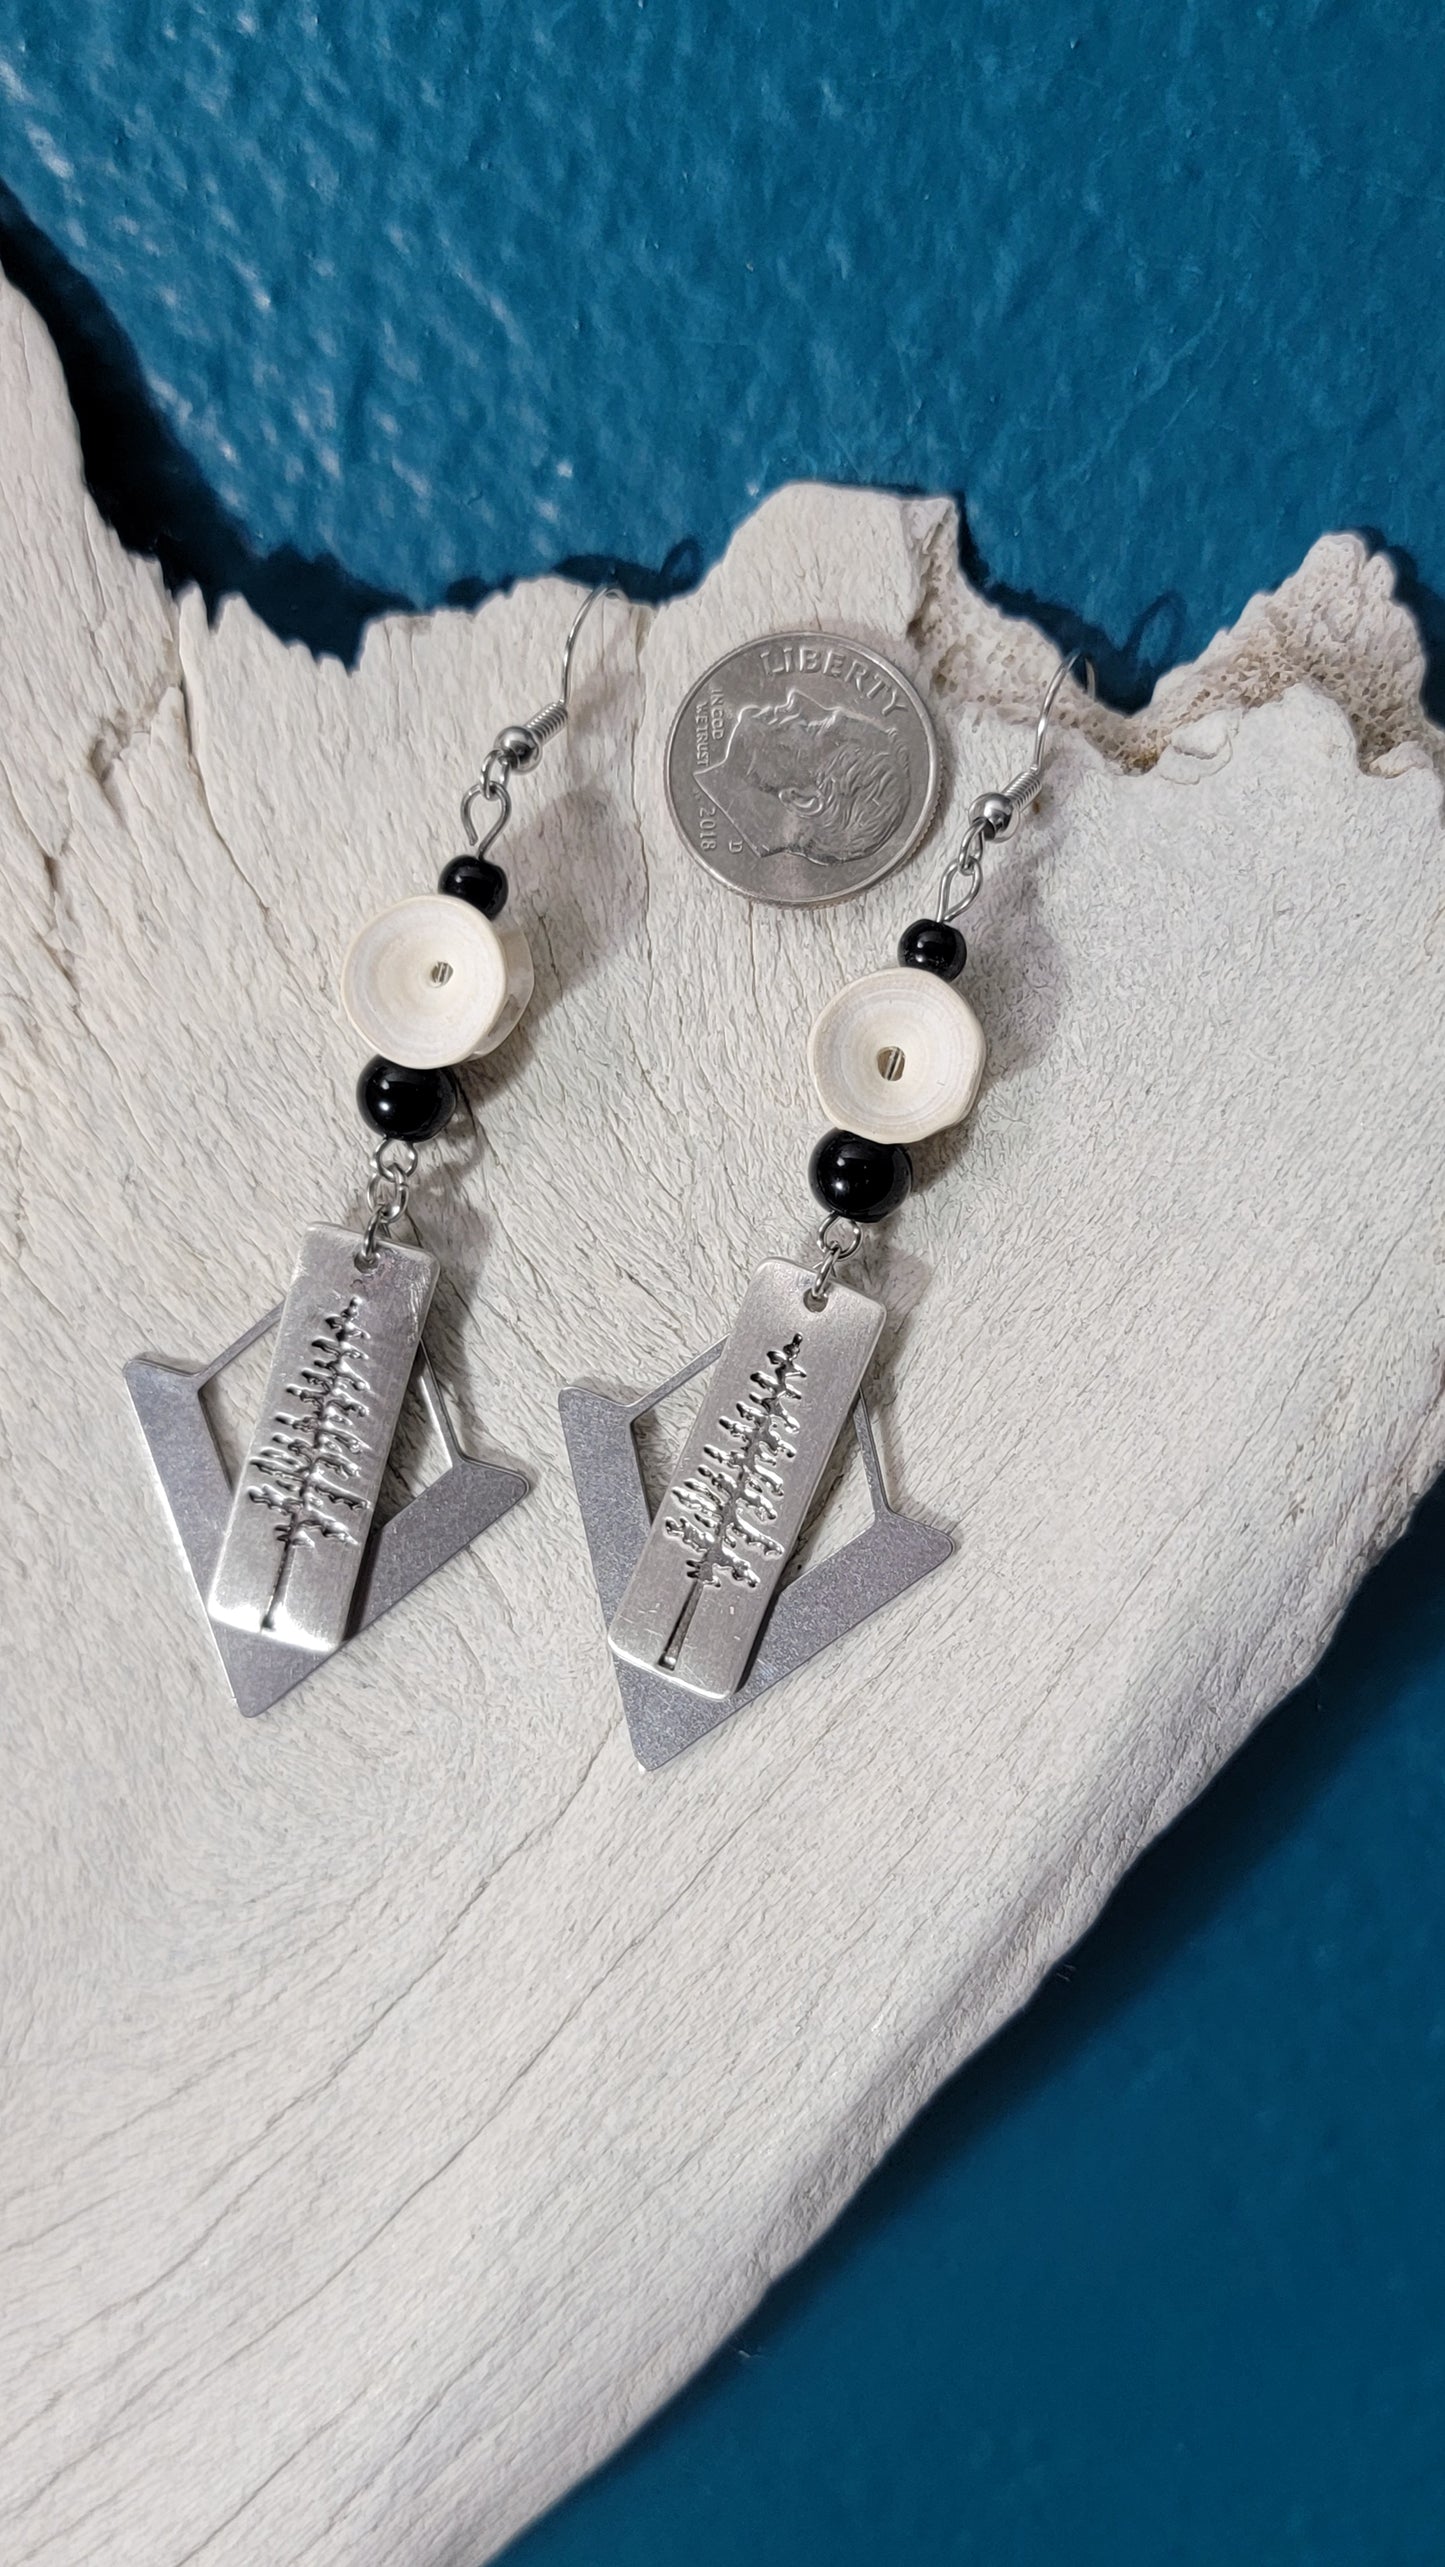 Etched Tree Design with Fish Bone Earrings